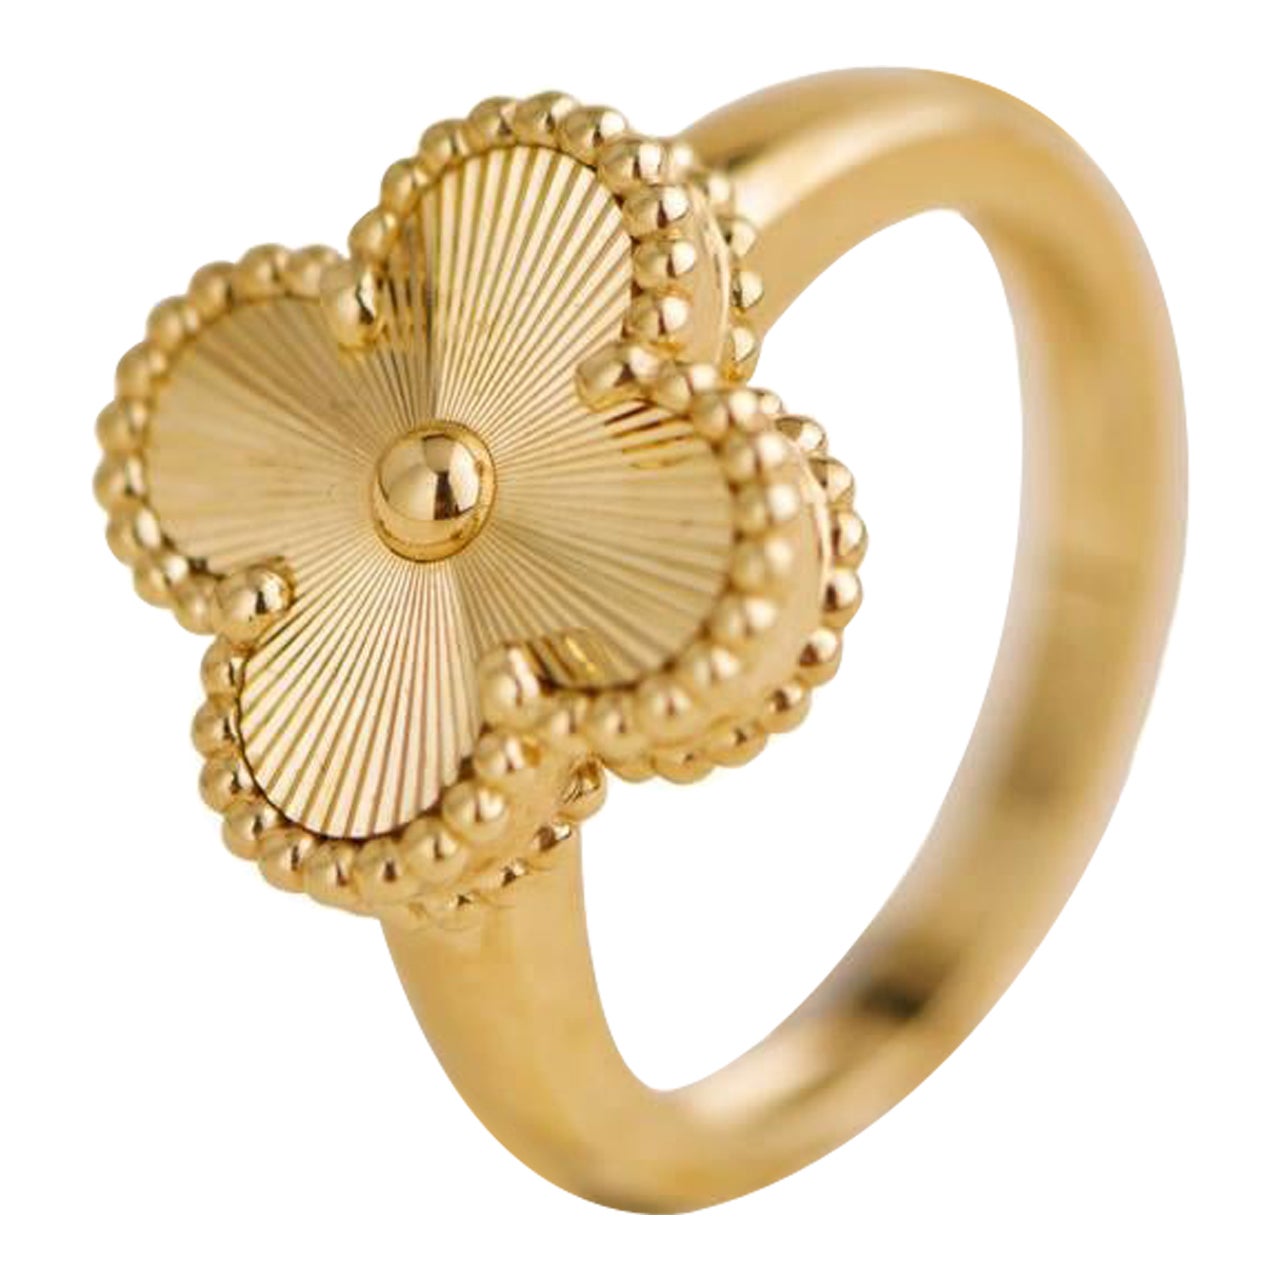 Van Cleef & Arpels Guilloché Alhambra 18k Yellow Gold Ring Size 54